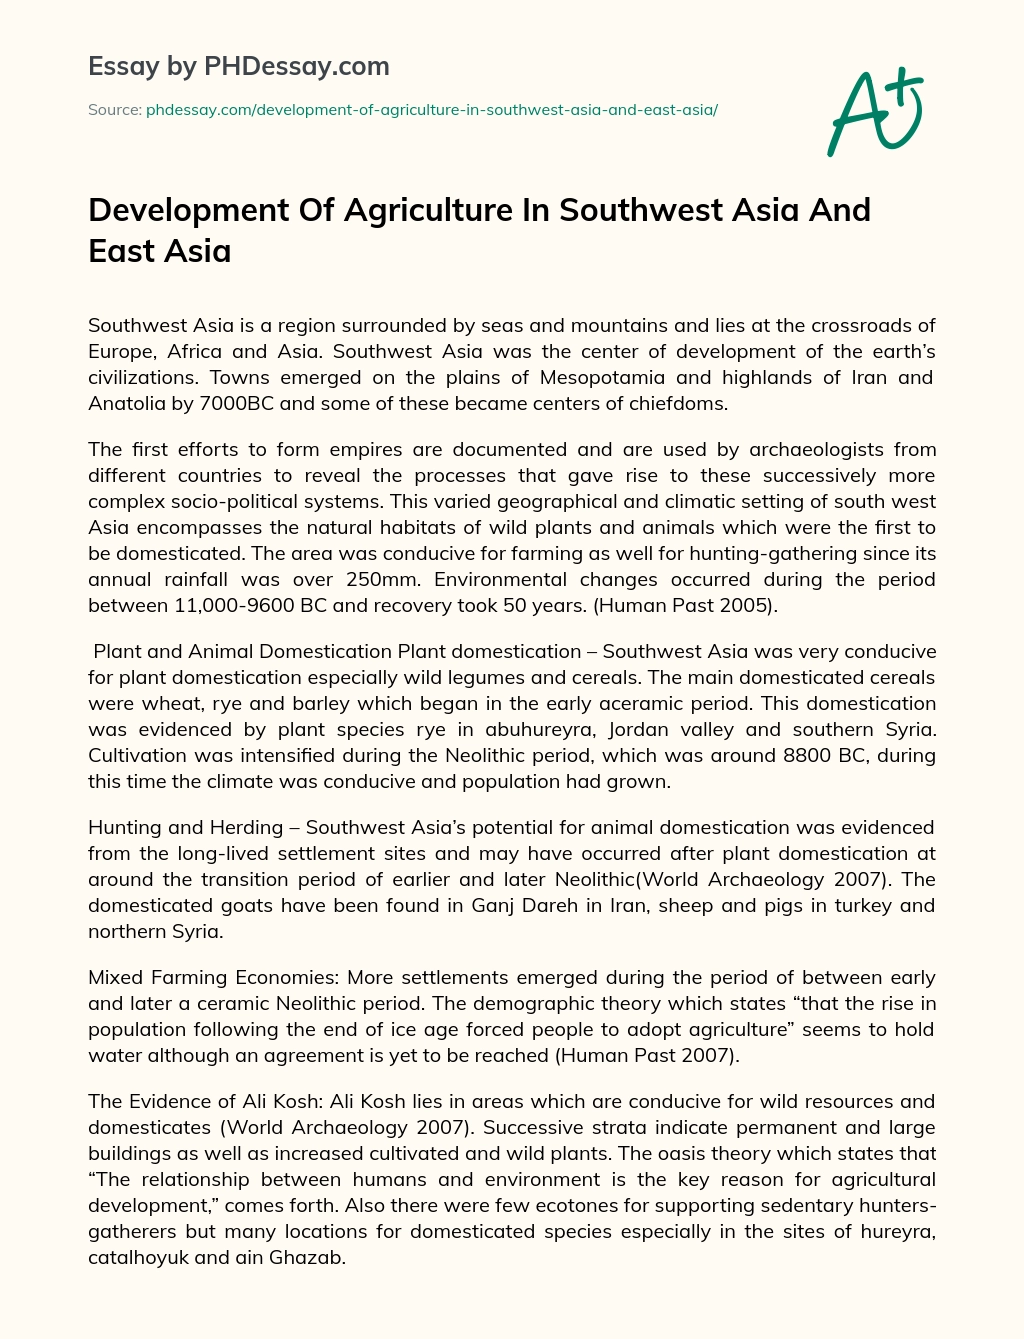 Development Of Agriculture In Southwest Asia And East Asia essay